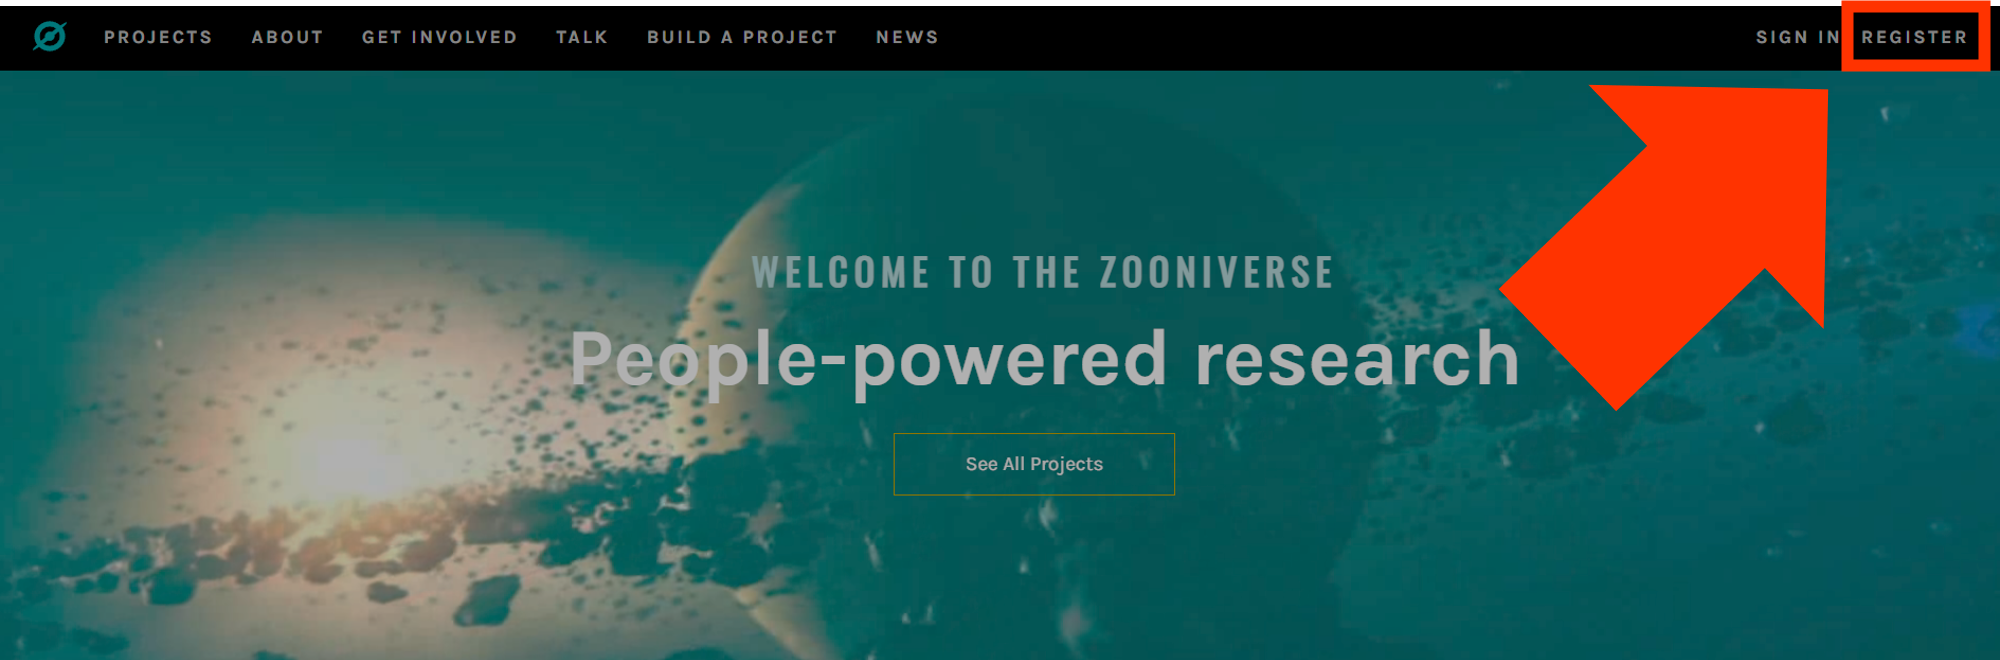 A screenshot of the homepage on Zooniverse with a red arrow pointing to the words "Register" at the top right corner.